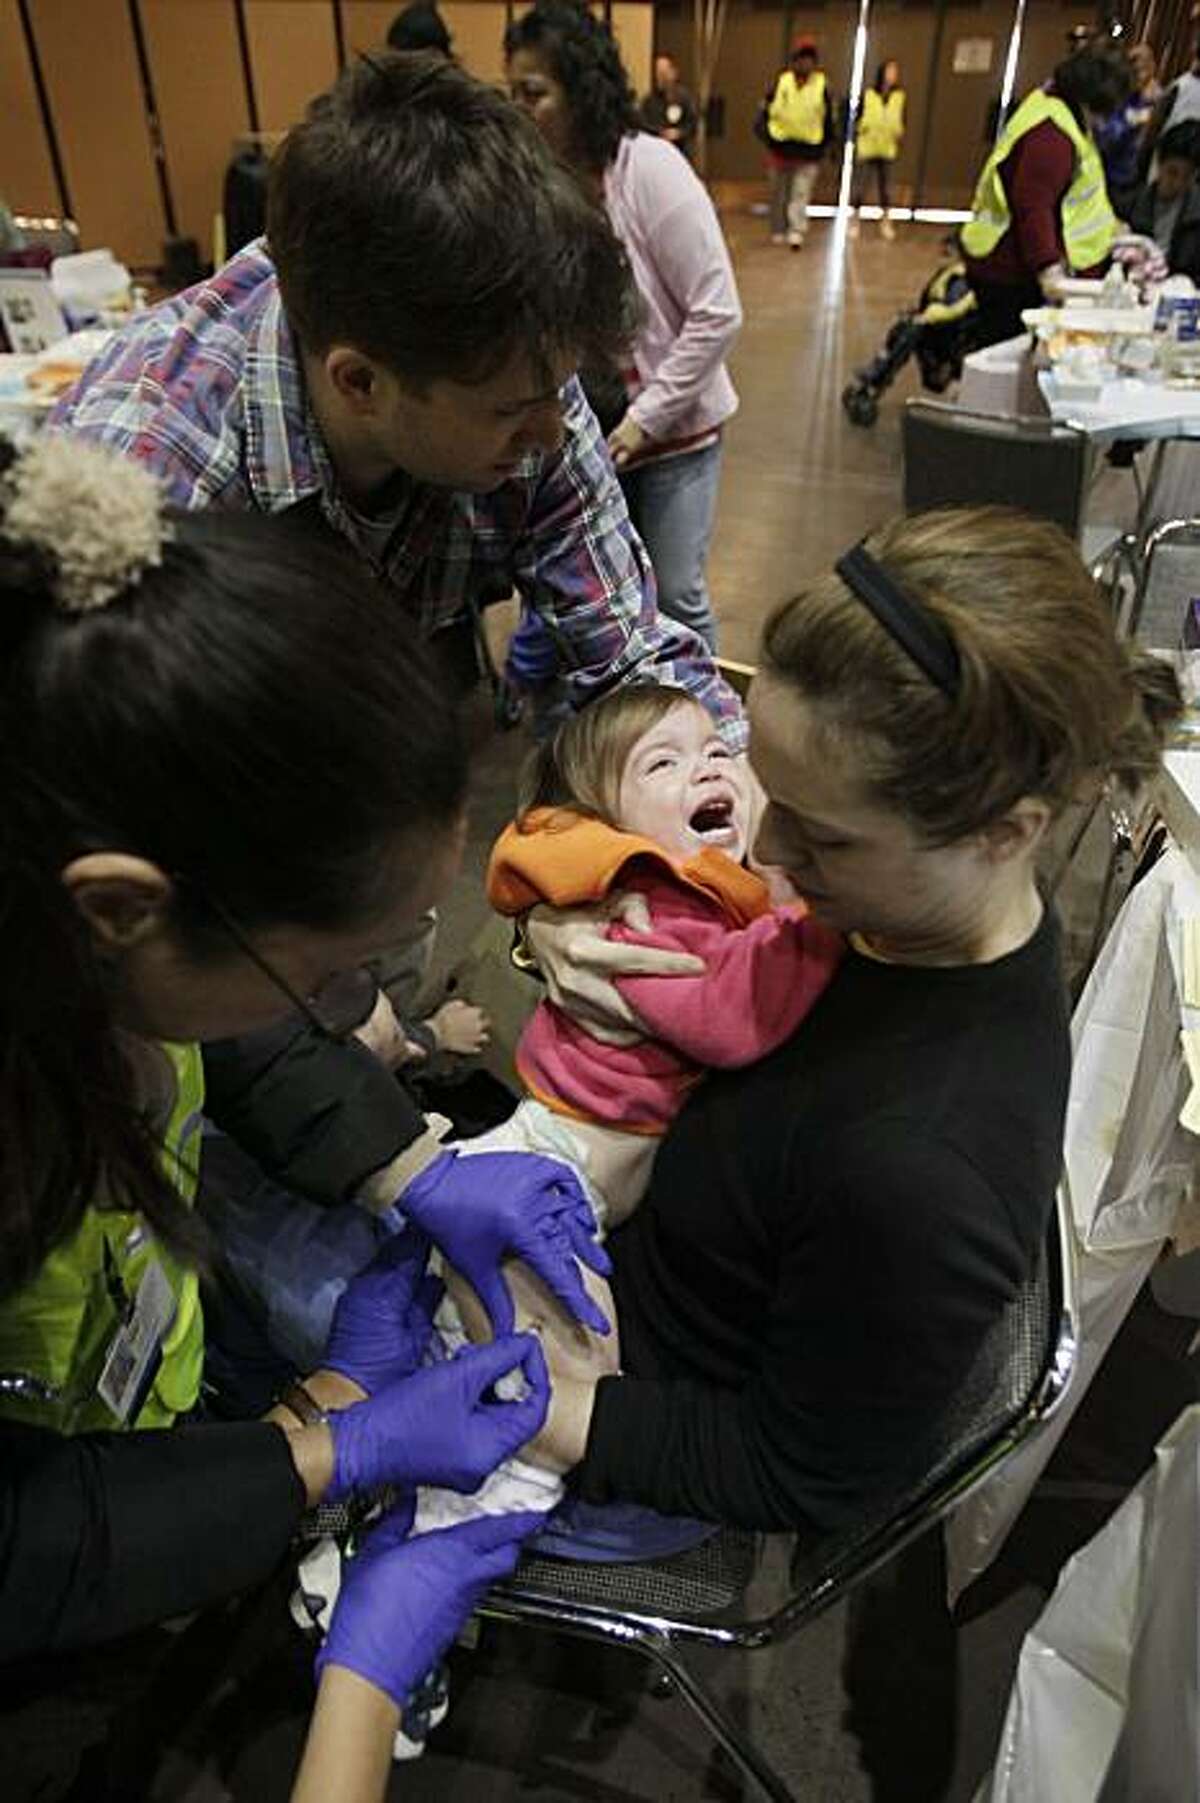 Lucy Jeffers, 1, receives a swine flu vaccine injection to her leg as her parents Crockett, top and Kate Jeffers hold her at the Bill Graham Civic Auditorium in San Francisco, Tuesday, Dec. 22, 2009. The city was administering 16,000 swine flu vaccinations Tuesday, the largest effort to date. (AP Photo/Marcio Jose Sanchez)